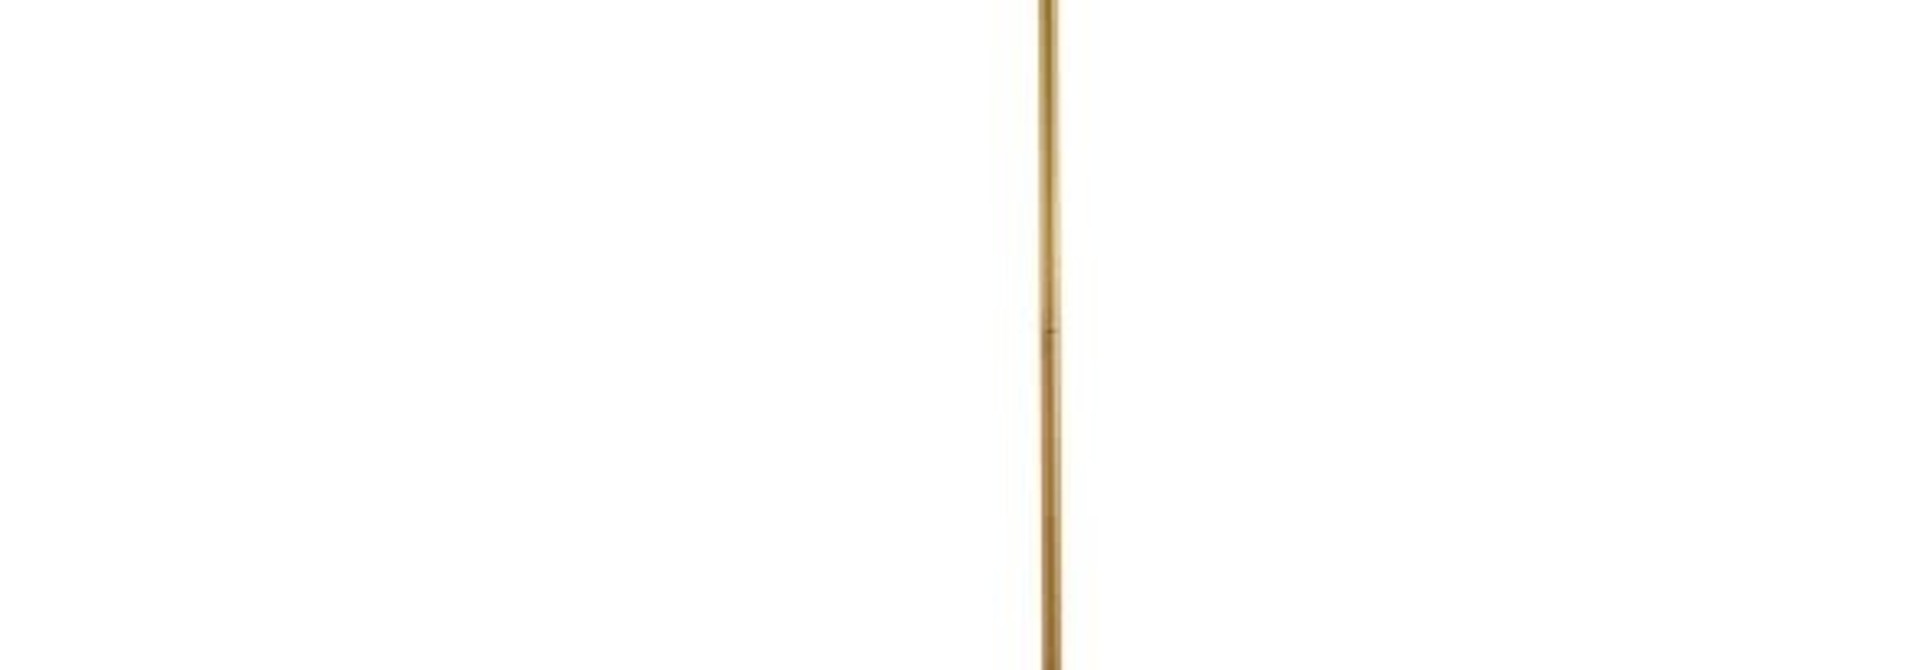 Maxstoke | The Floor Lamp Collection, 15 Inch x 33 Inch x 66.75 Inch